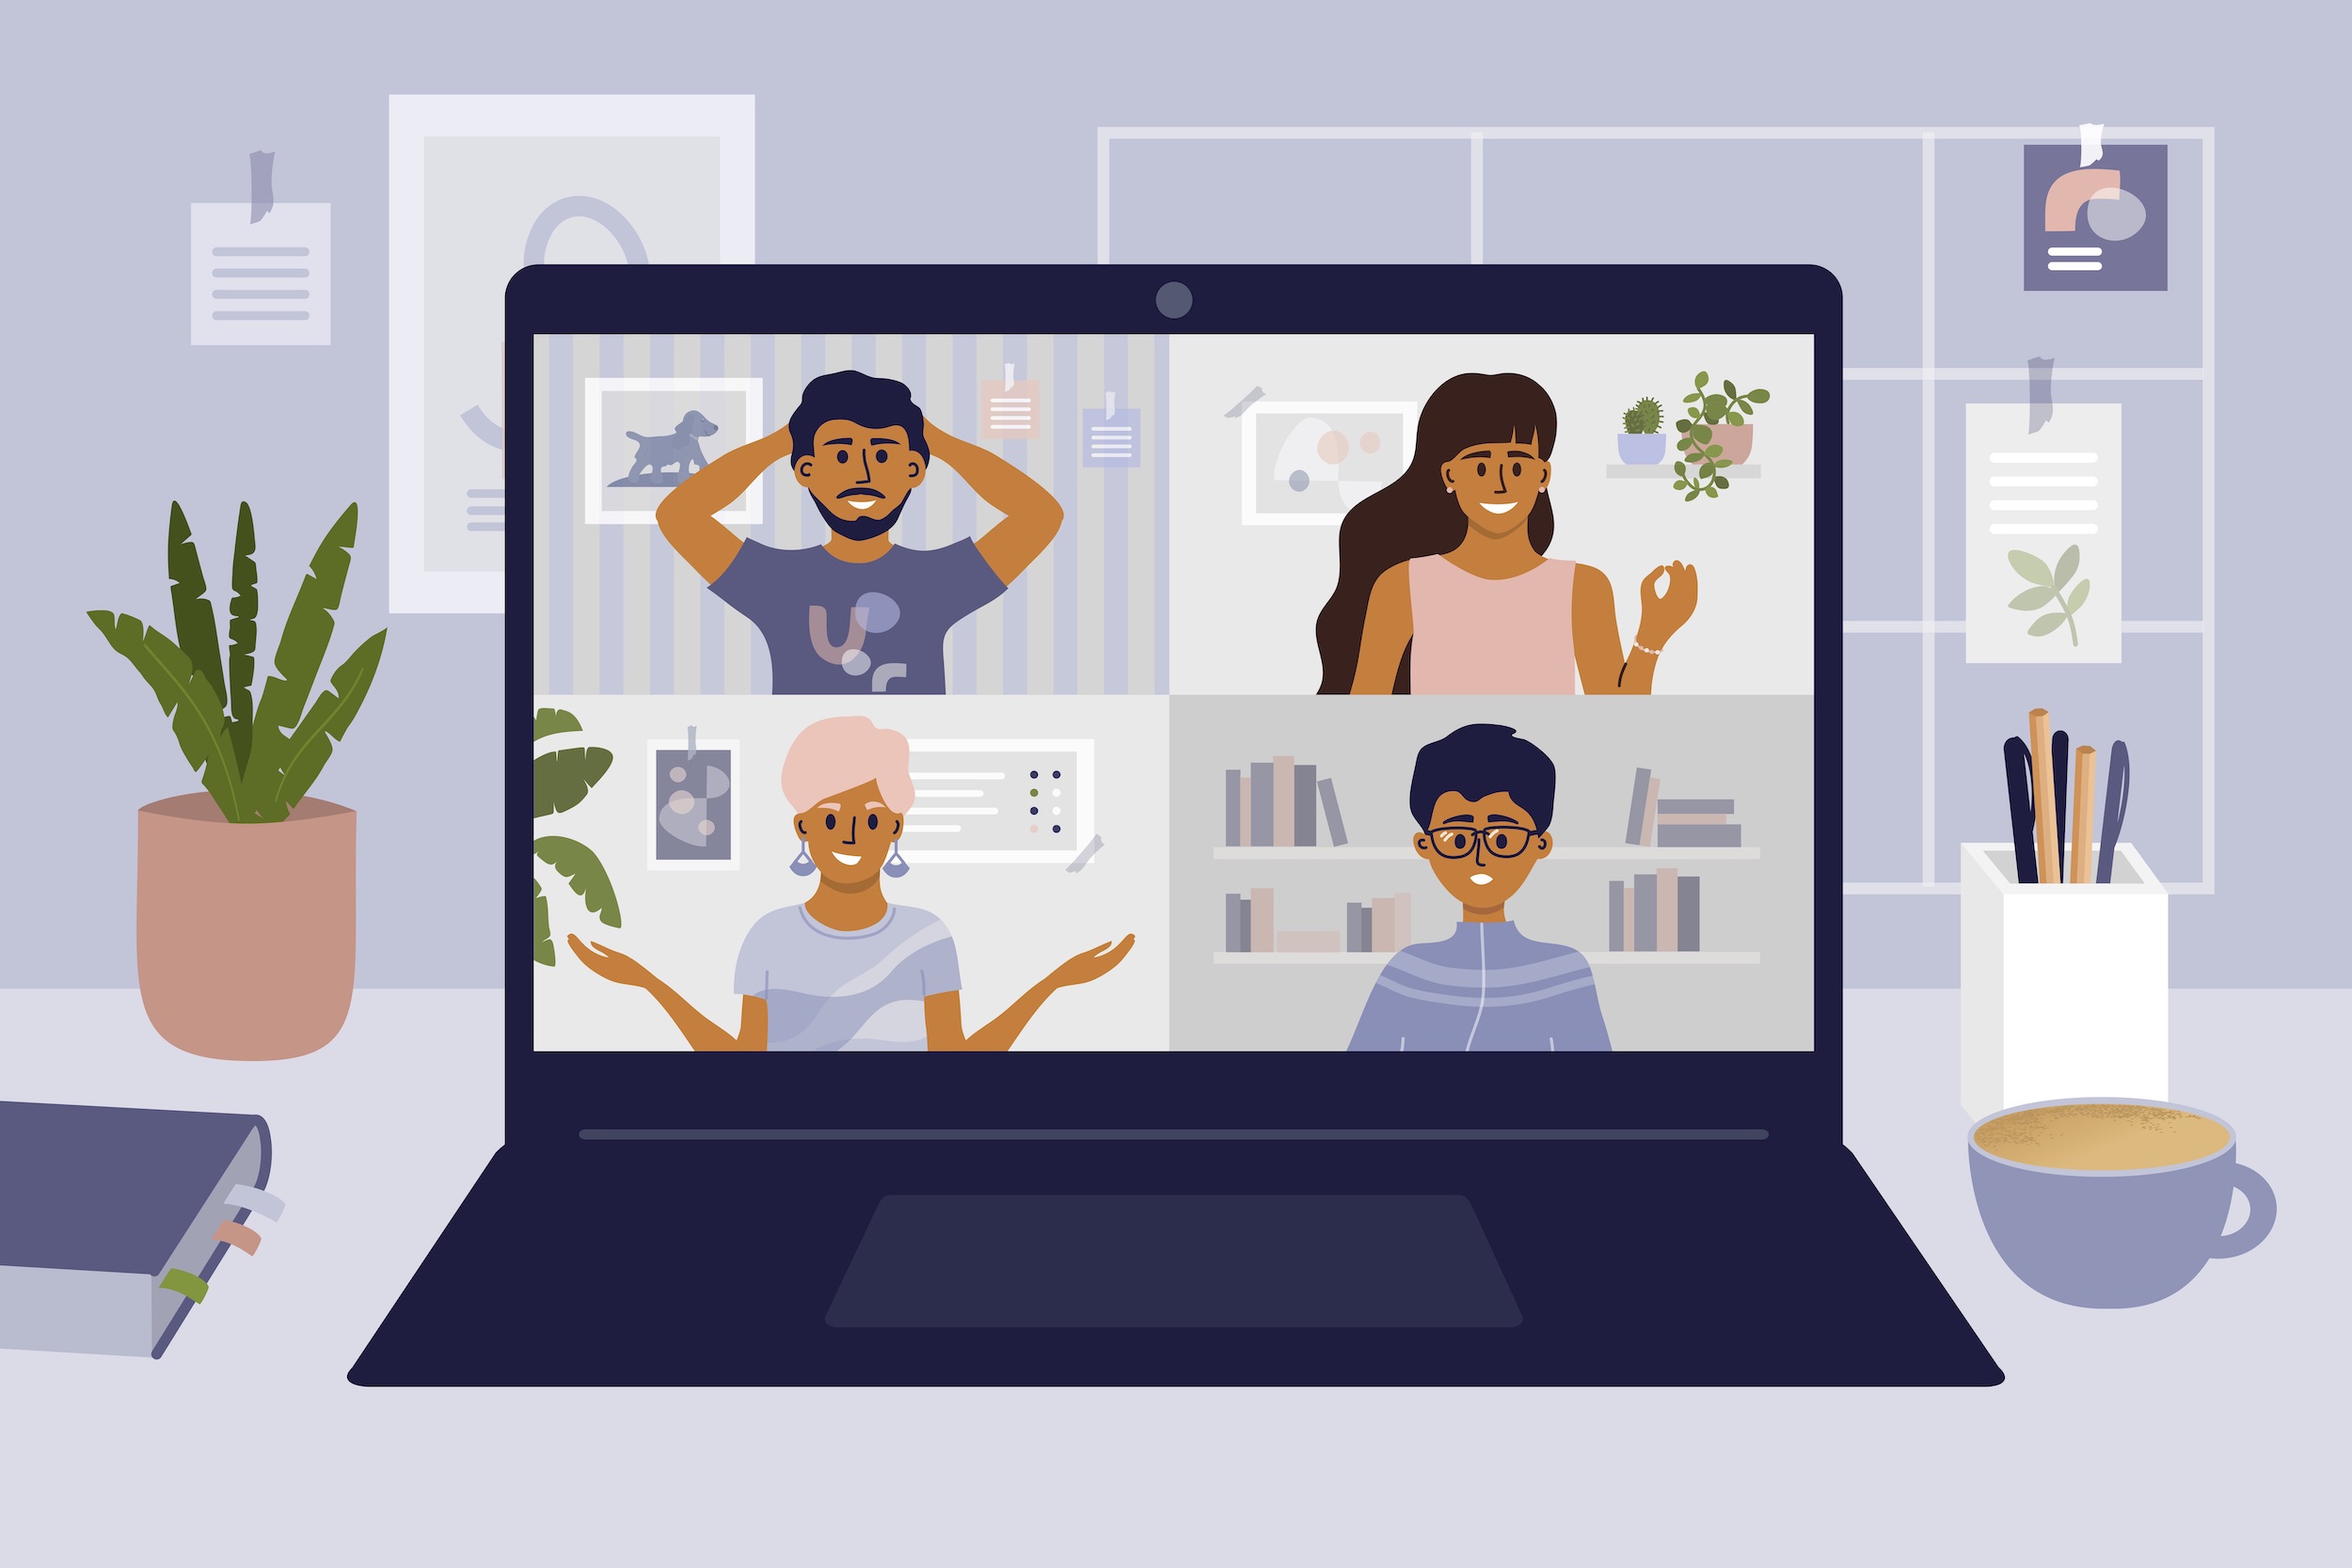 How to Keep Remote Employees Engaged and Connected